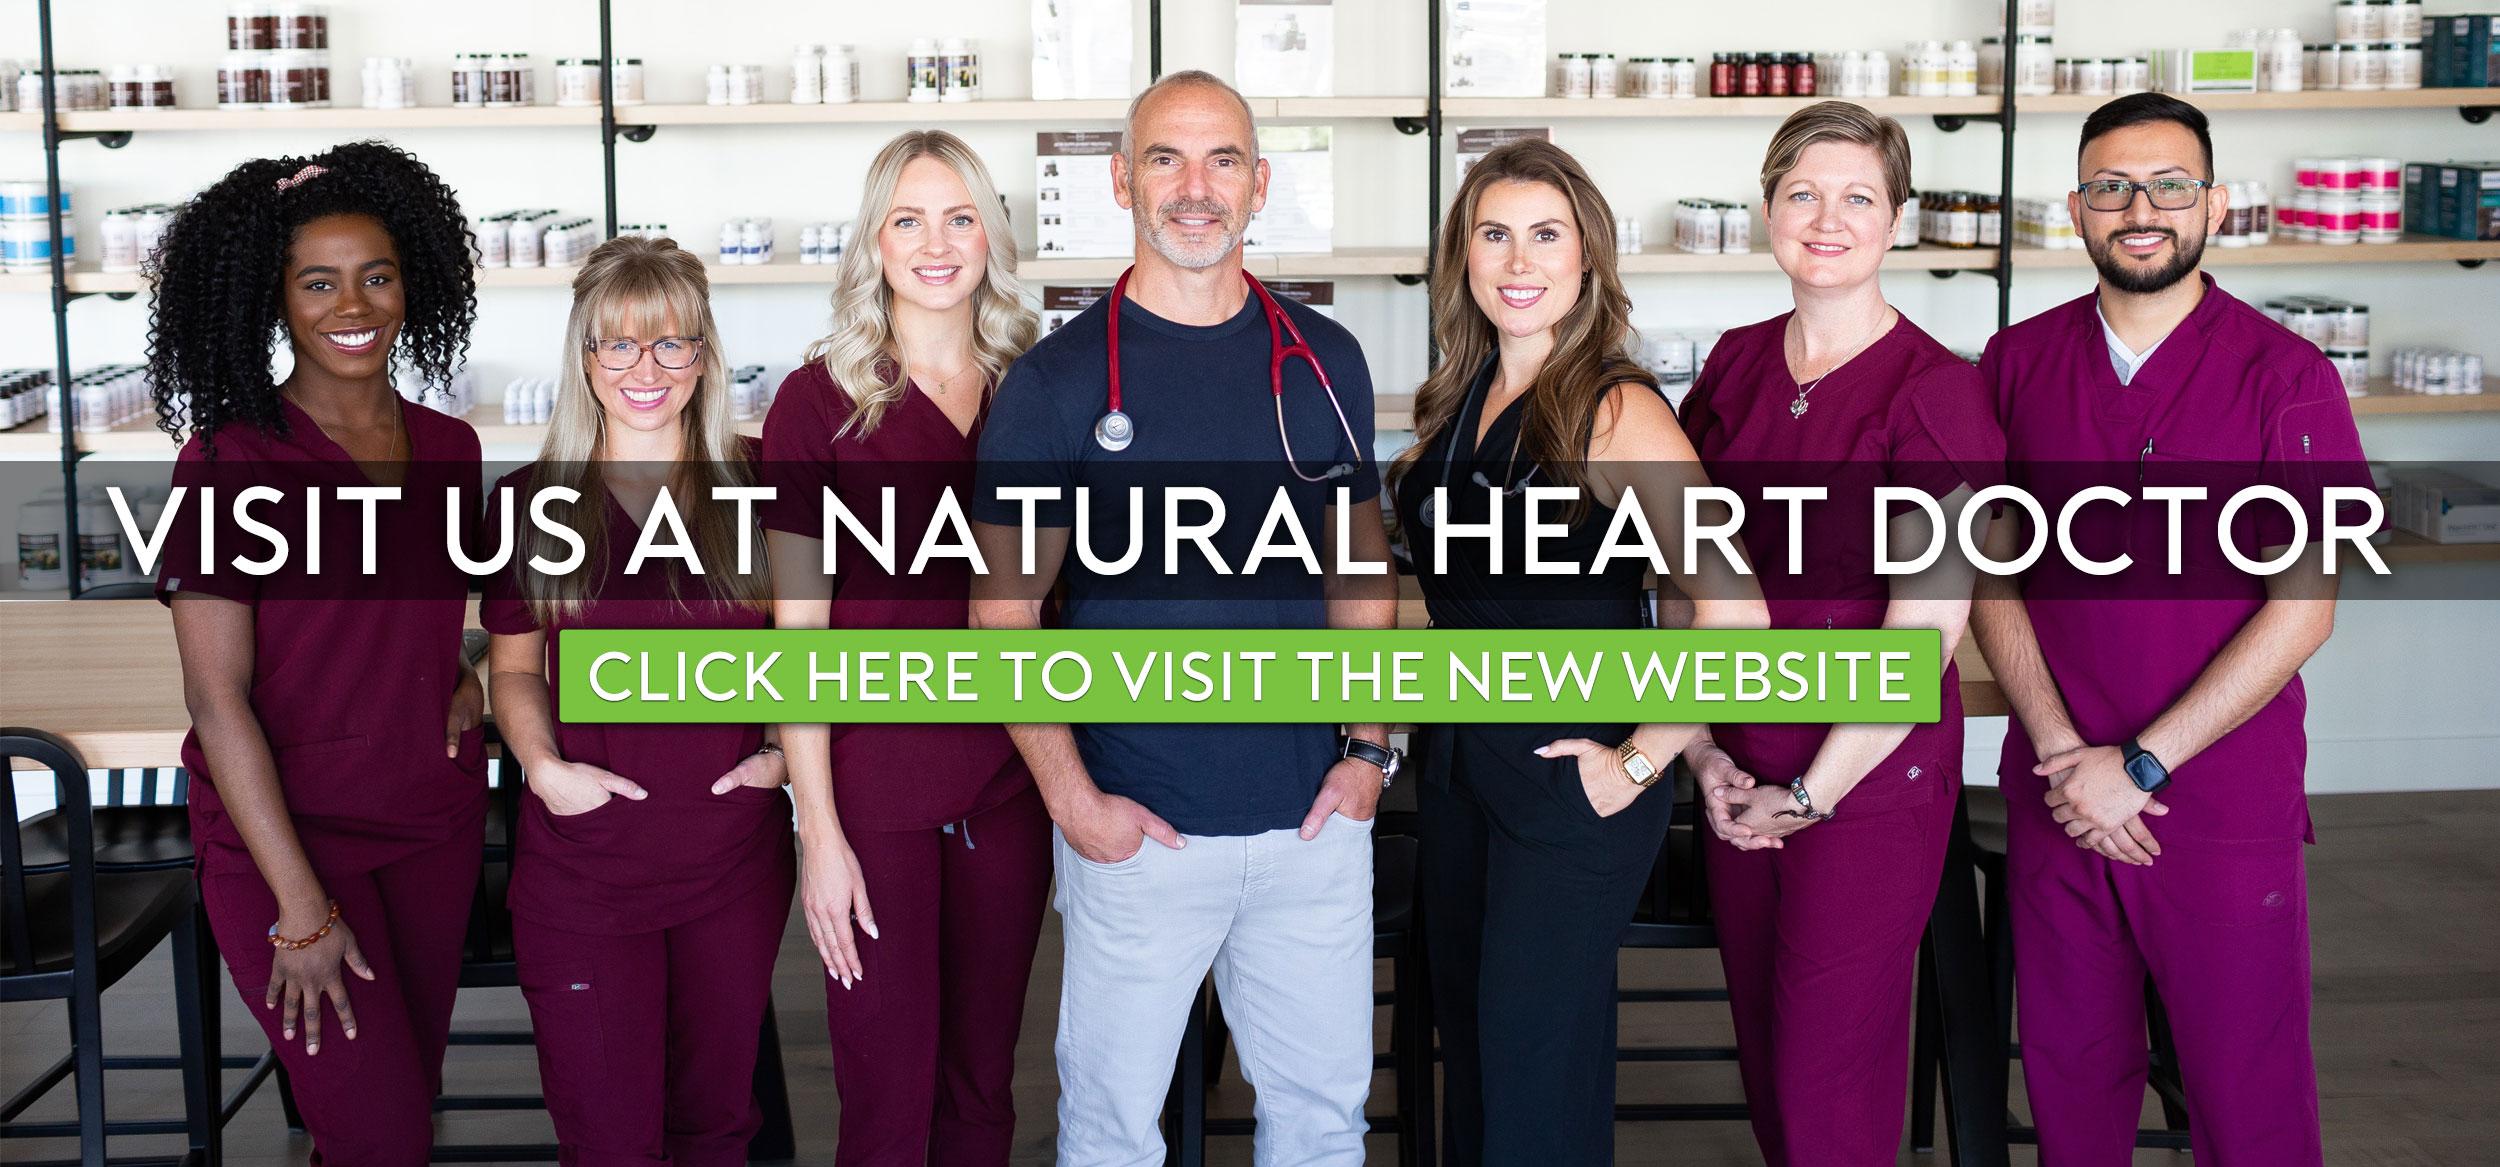 Cardiologist Dr. Jack Wolfson - Natural Heart Doctor